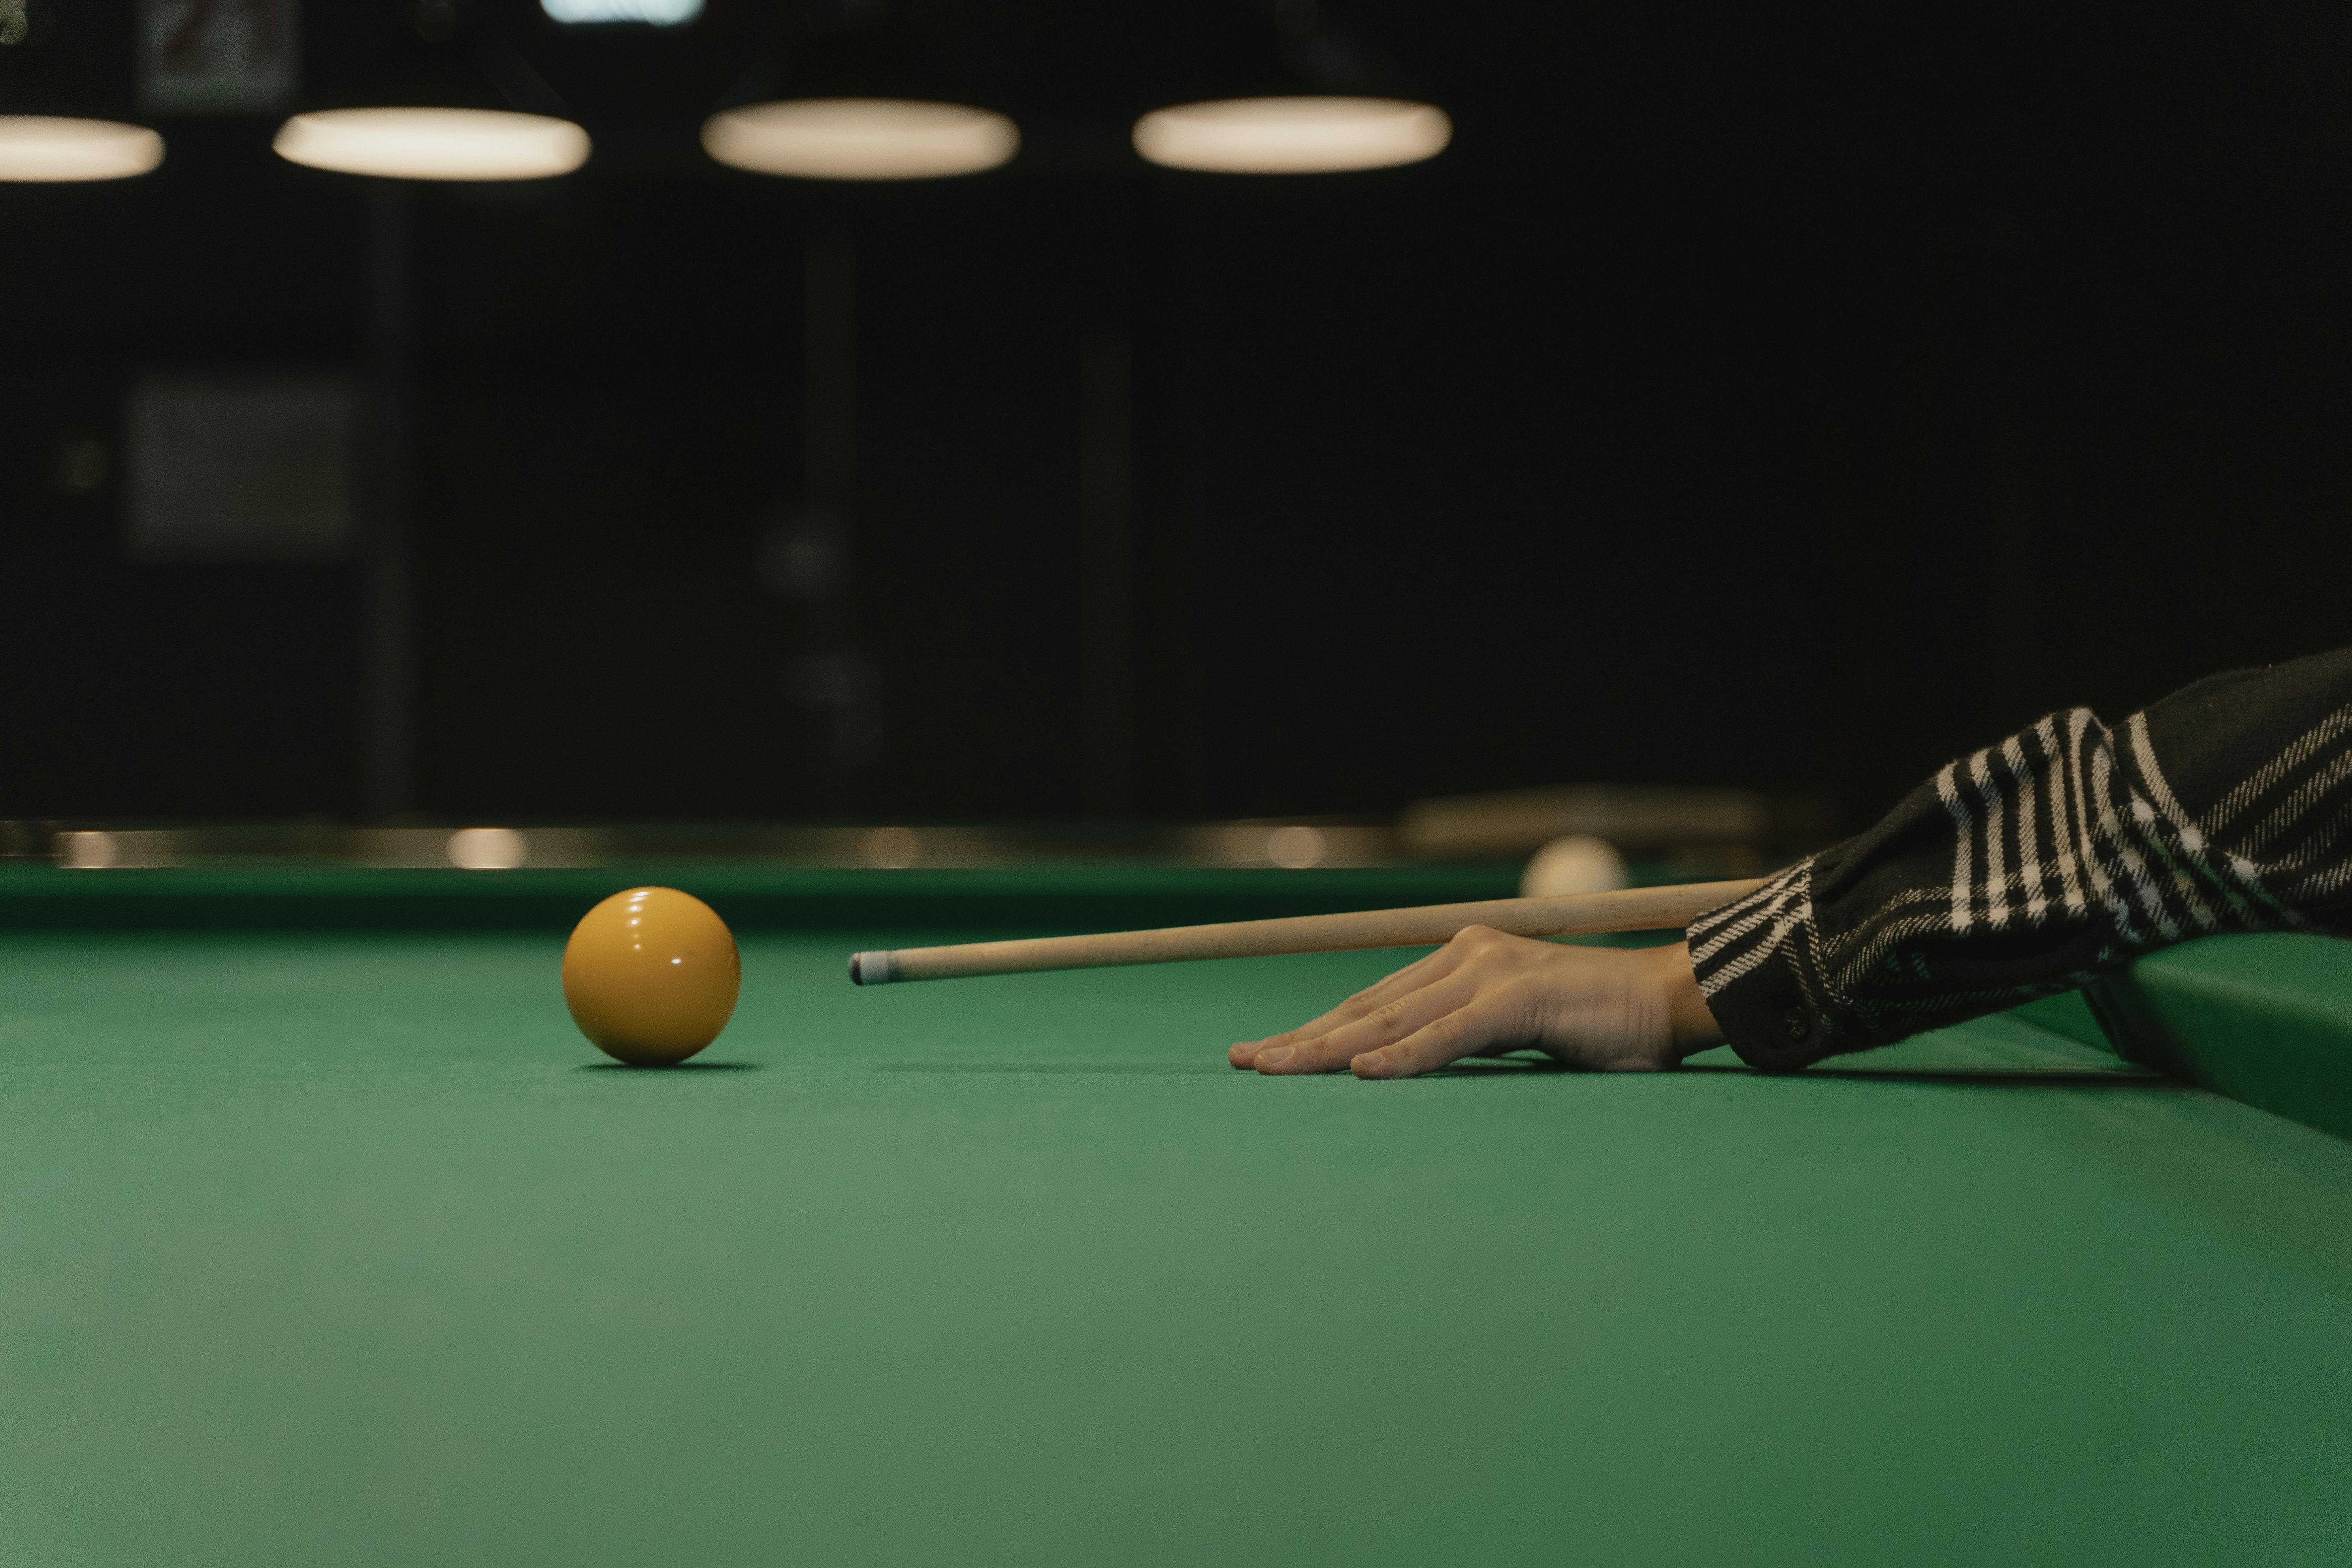 Free stock photo of action, ball, balls, billiard, billiard ball, billiard balls, billiard table, billiards, challenge, charming, club, cue, cue balls, cue sports, cue stick, dug out pool, entertain, ethnic, fashion, felt